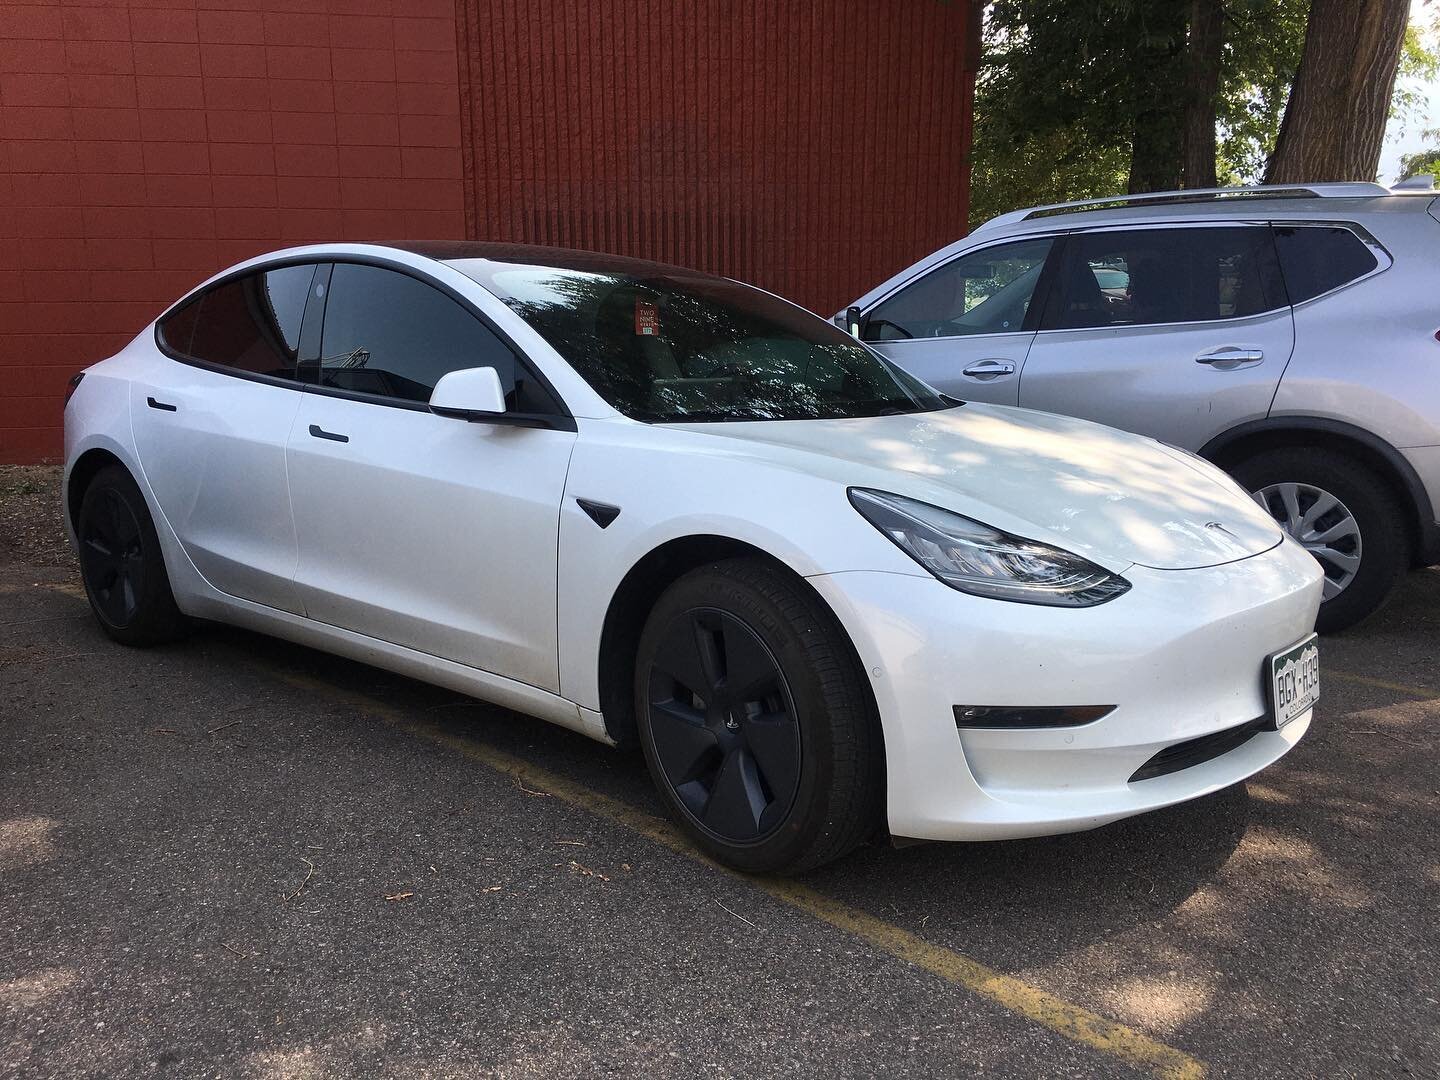 What a Monday! 2 Tesla mode 3s, one for full standard tint the other for full ceramic plus windshield and a partial front clip ppf. We also had a Range Rover for front 2 ceramic and a Porsche macan for front 2 ceramic. Staying busy. We got a bunch ne